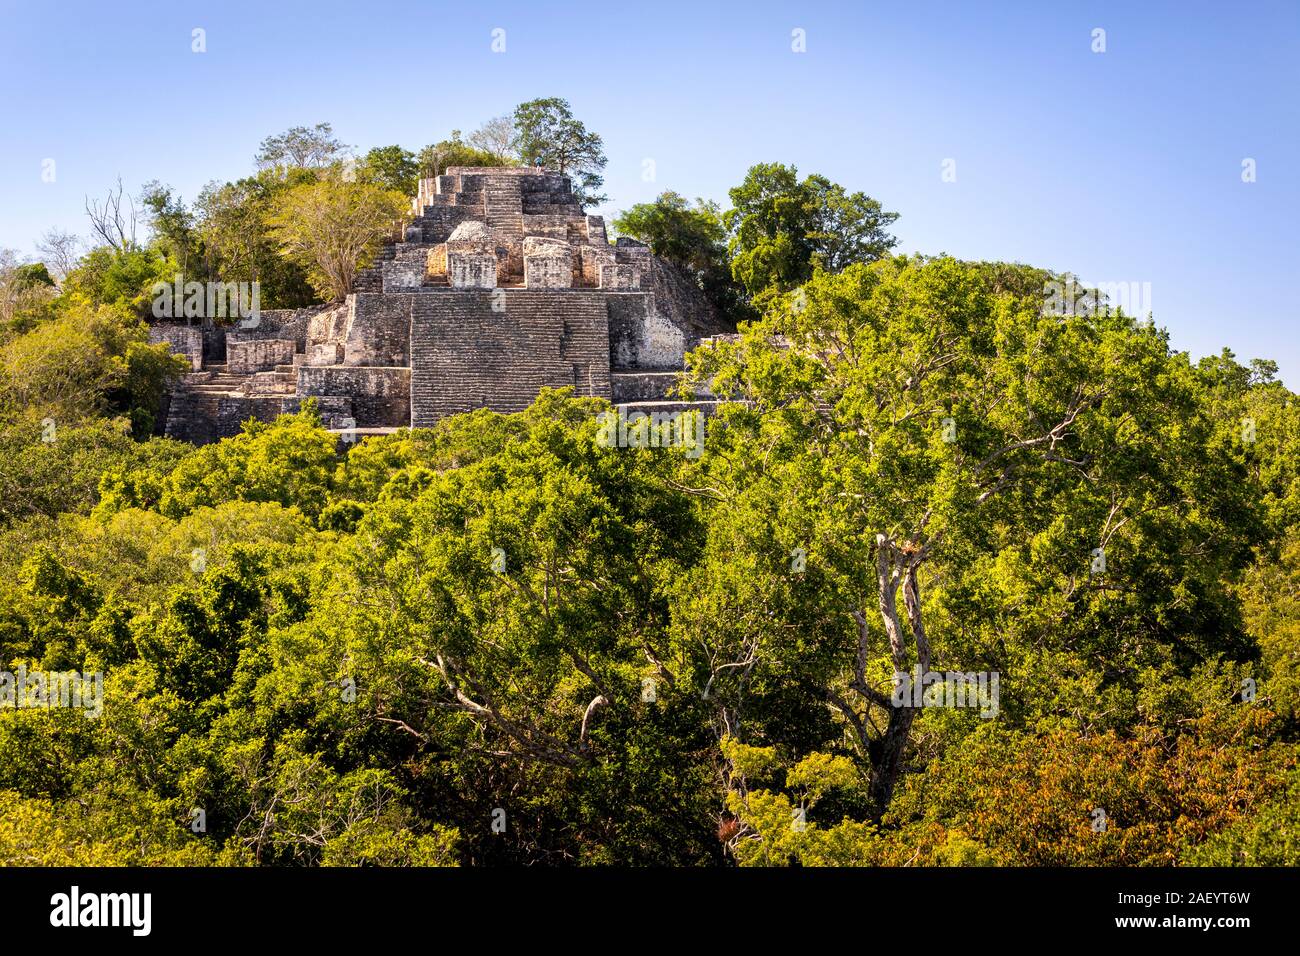 The main pyramid (Structure II) at Calakmul Archaeological Site in Campeche, Mexico. Stock Photo